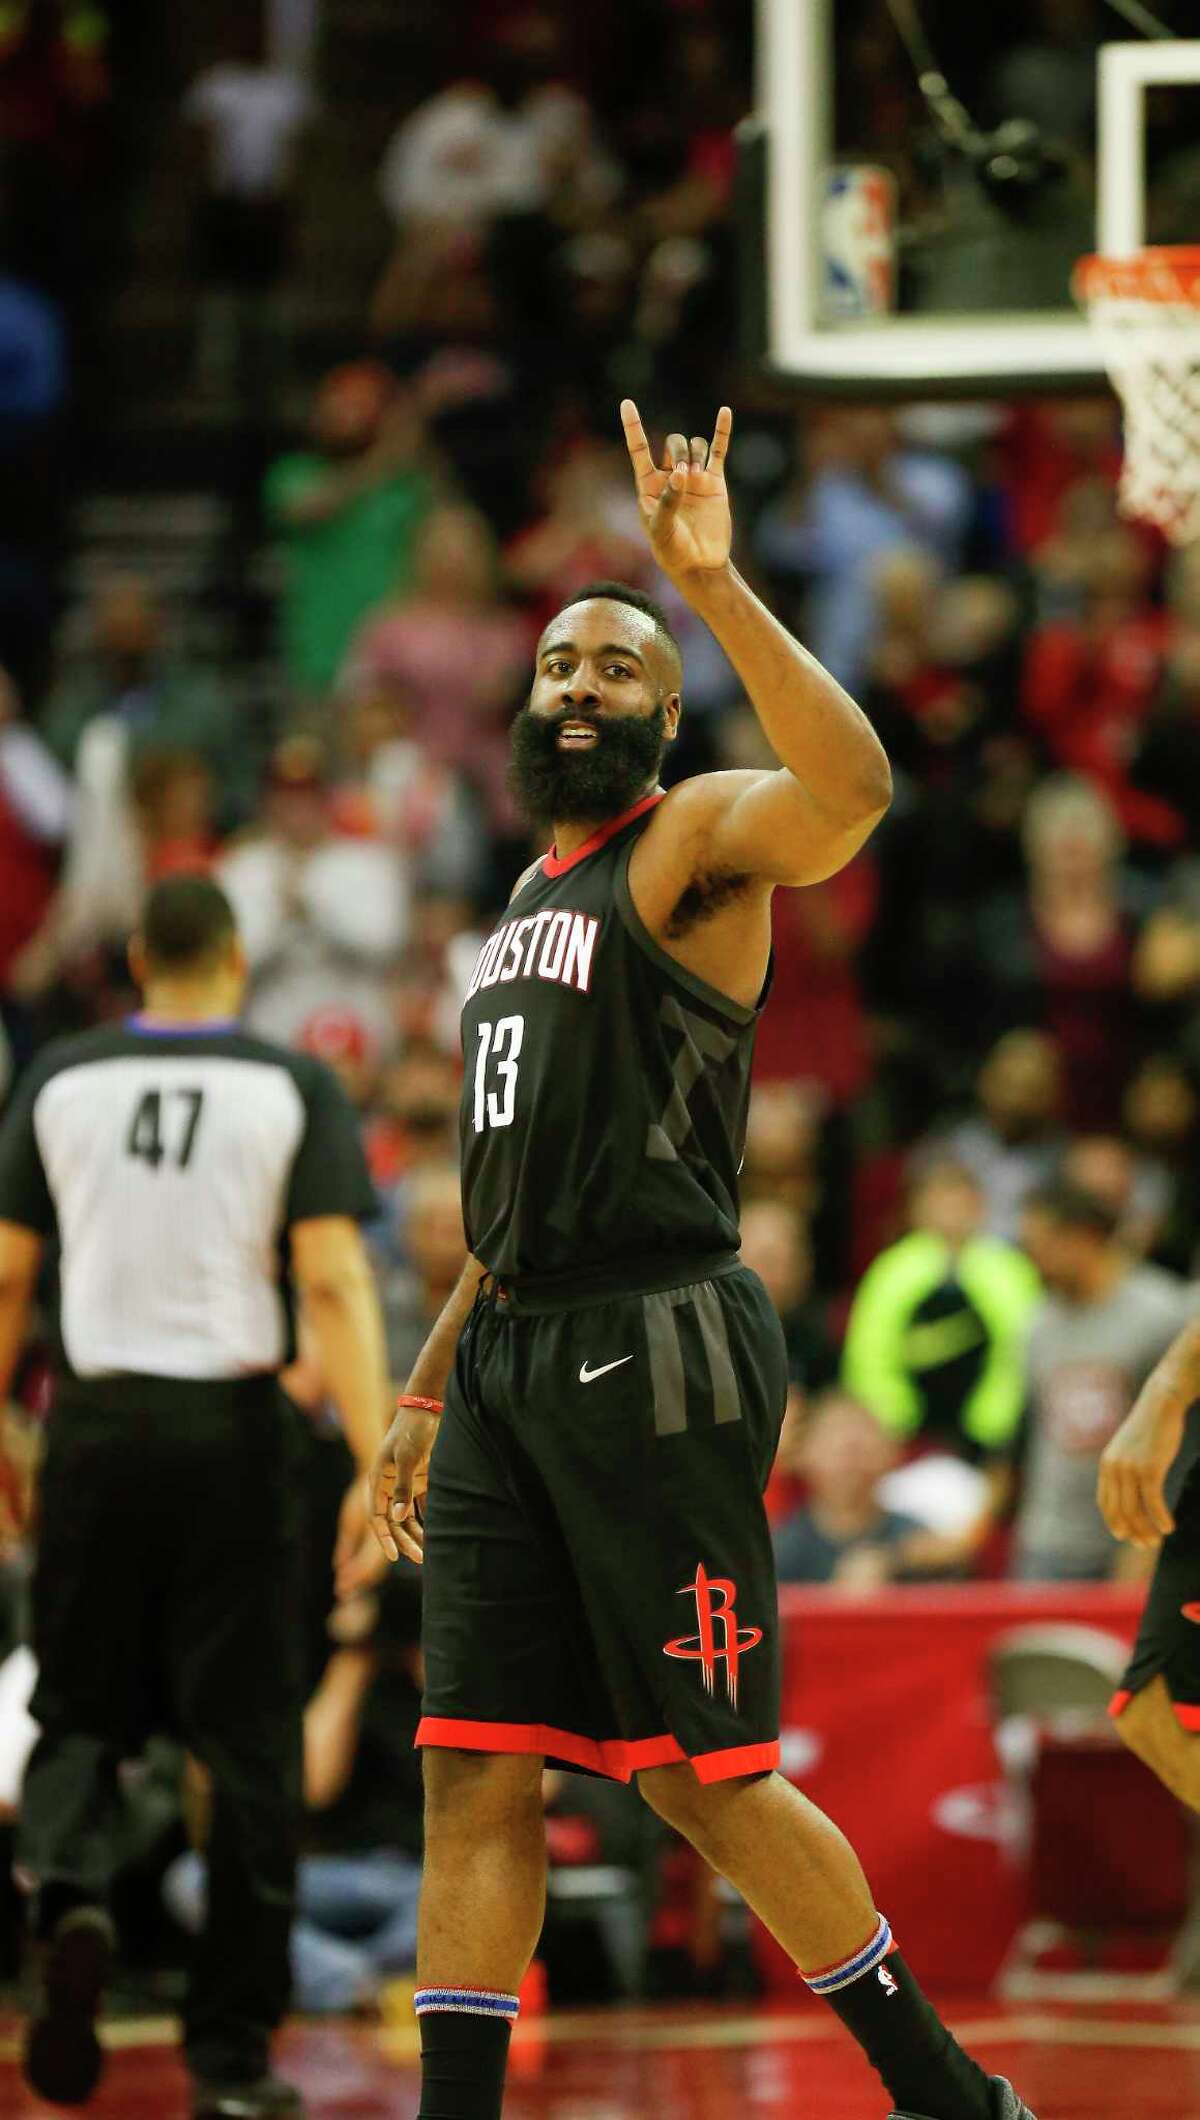 Houston Rockets guard James Harden (13) smiles at the crowd after scoring in the 4th-quarter of an NBA basketball game at Toyota Center on Tuesday, Jan. 30, 2018, in Houston.